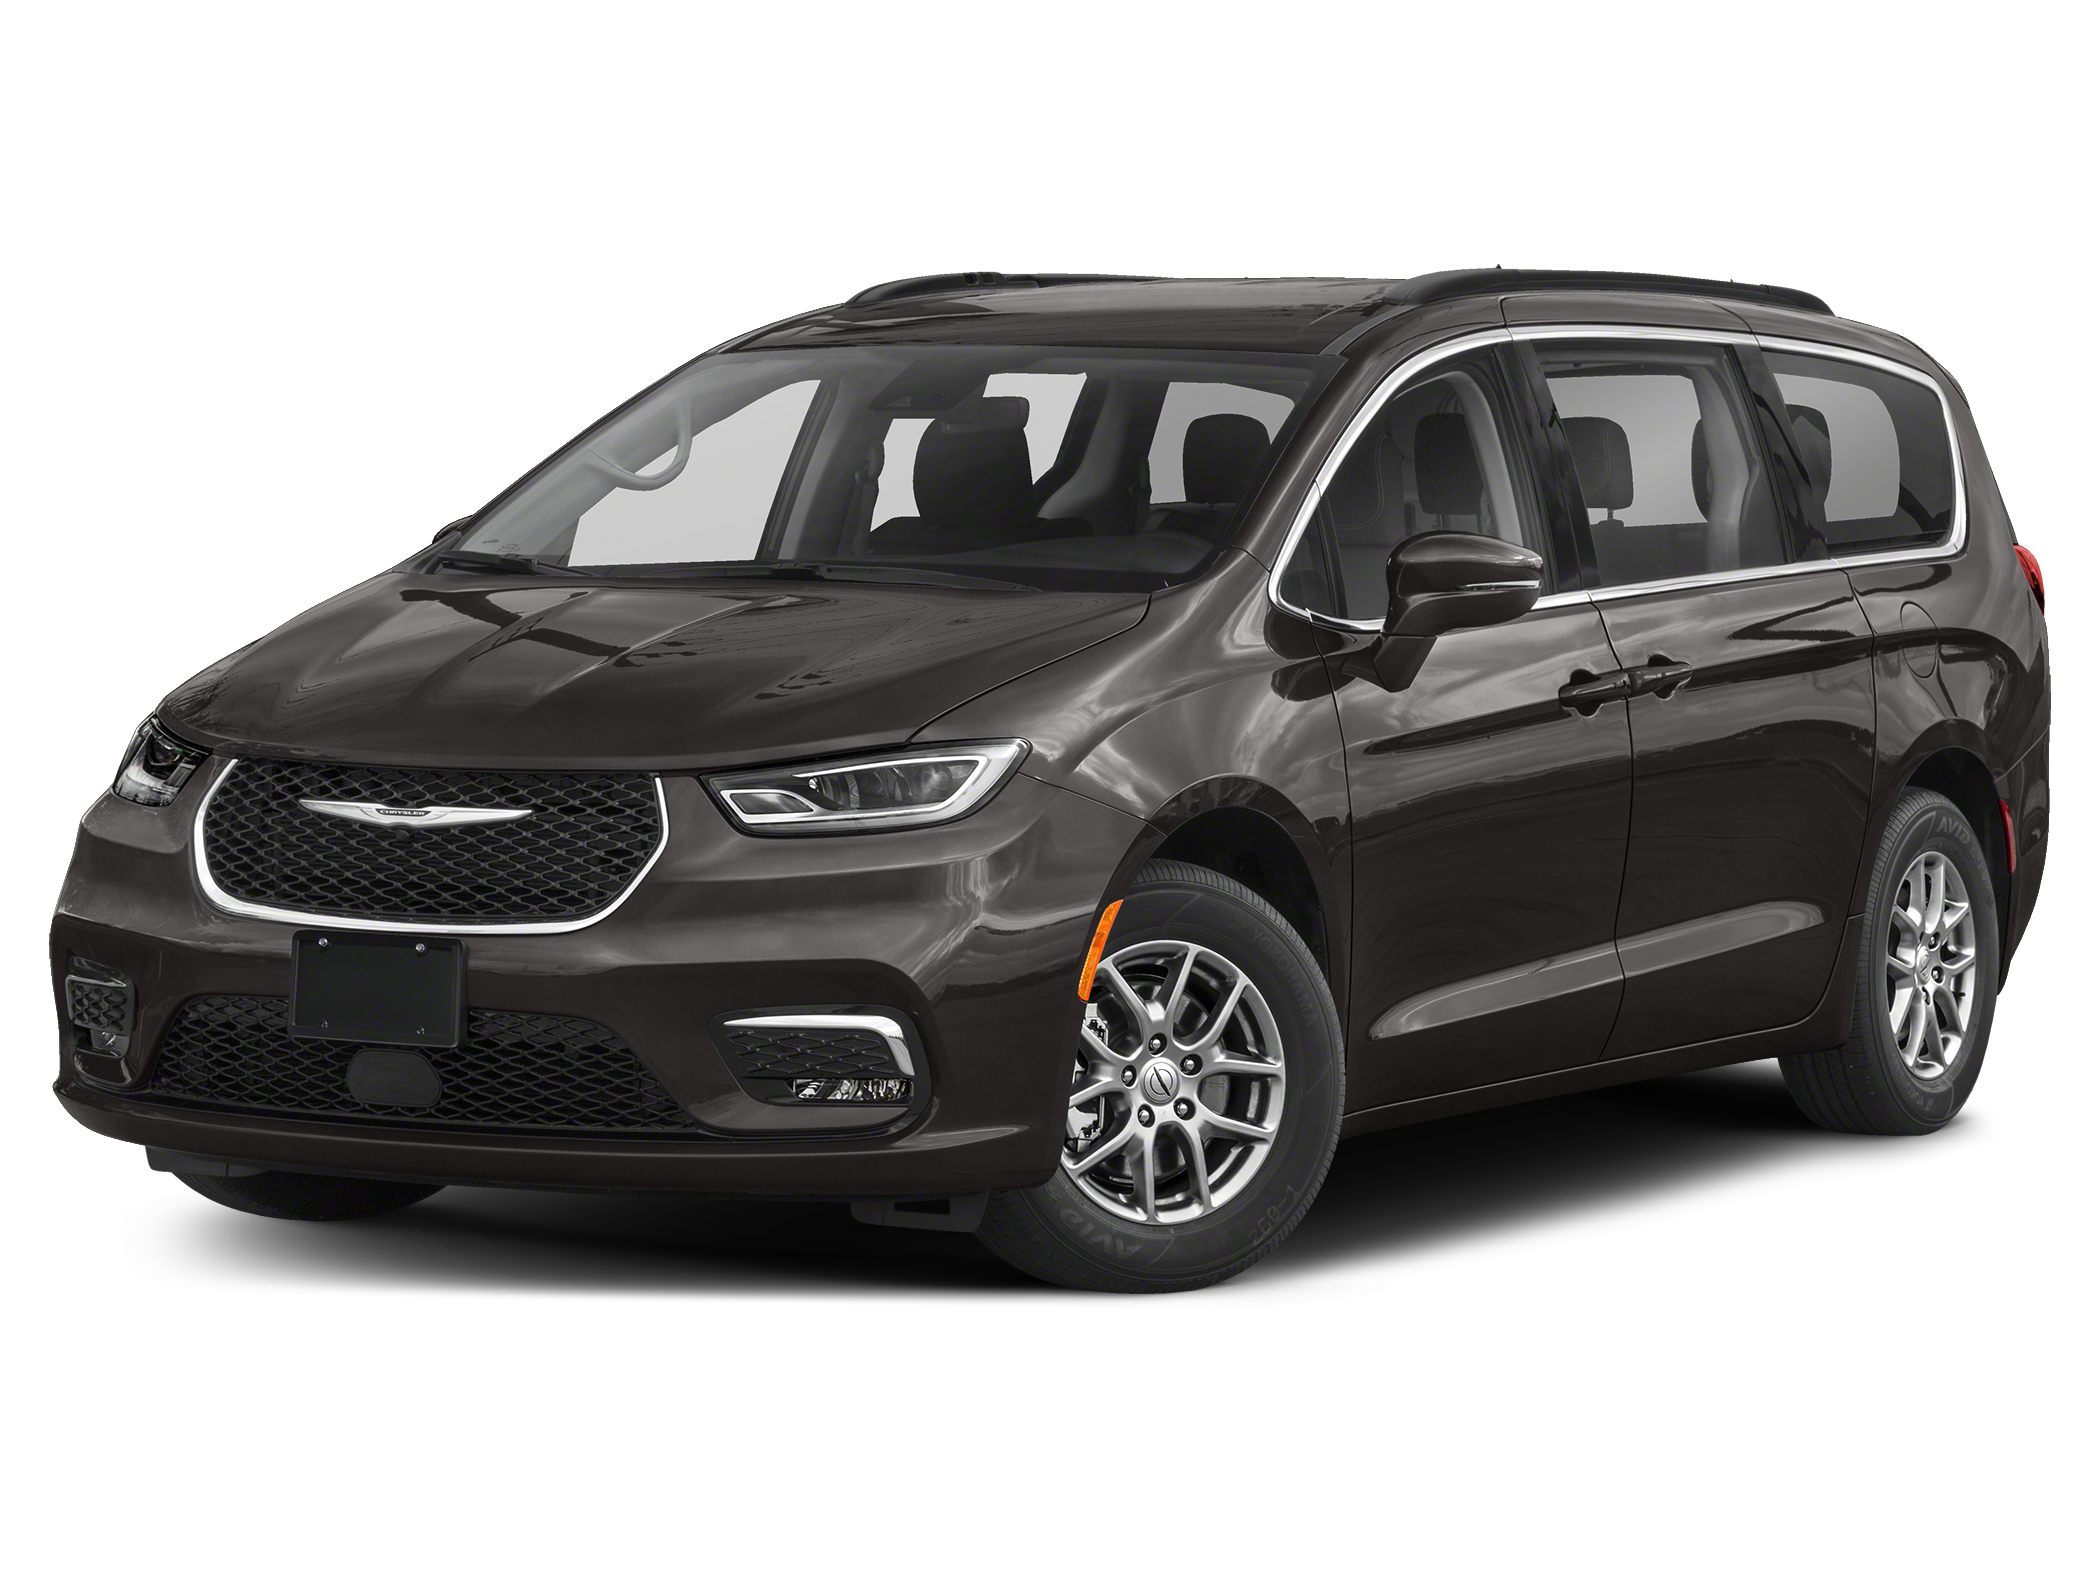 Used 2021 Chrysler Pacifica Touring L For Sale | East Hanover NJ 